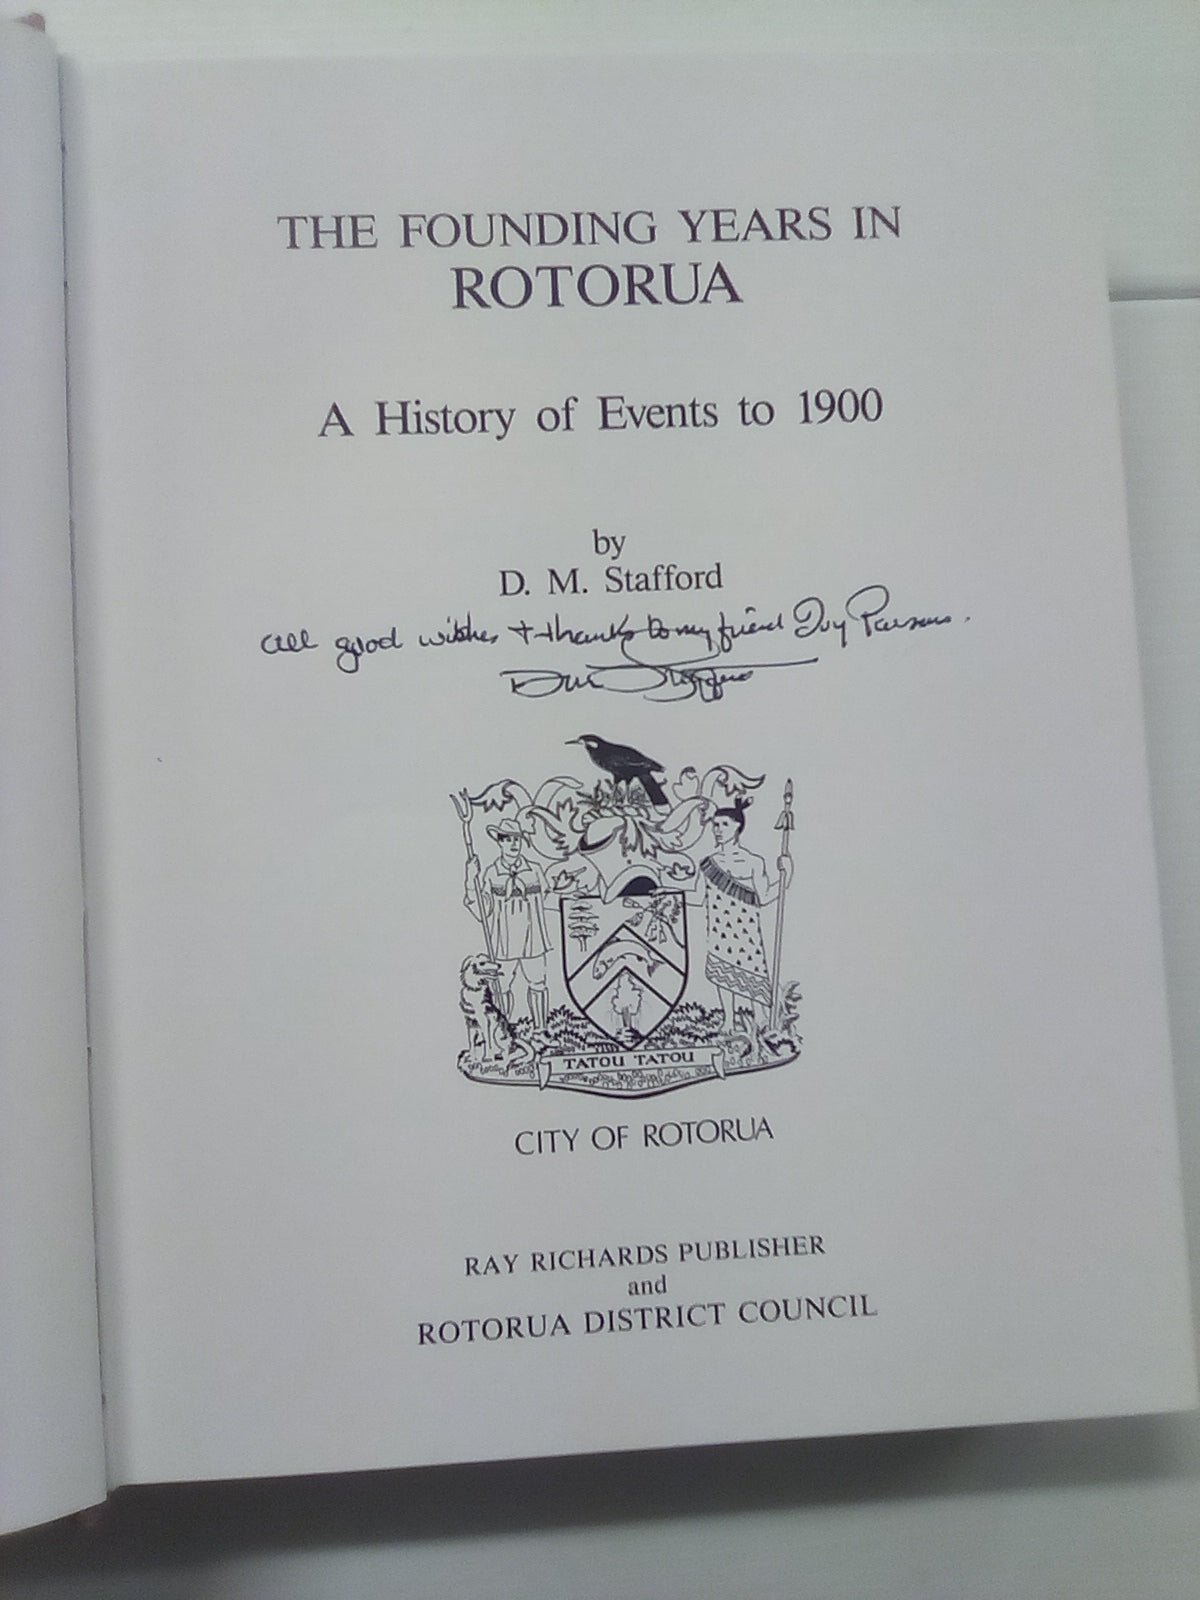 The Founding Years of Rotorua (Signed Copy) - A History of Events to 1900 by D.M. Stafford